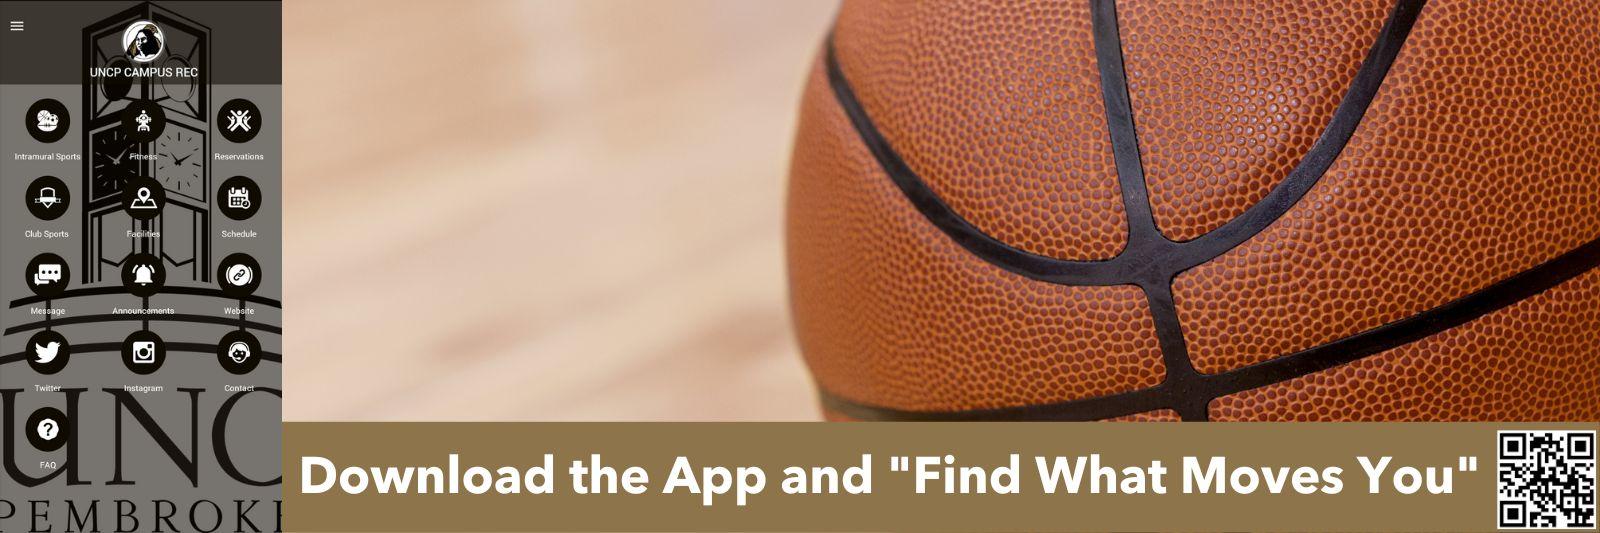 Basketball with Campus Rec App